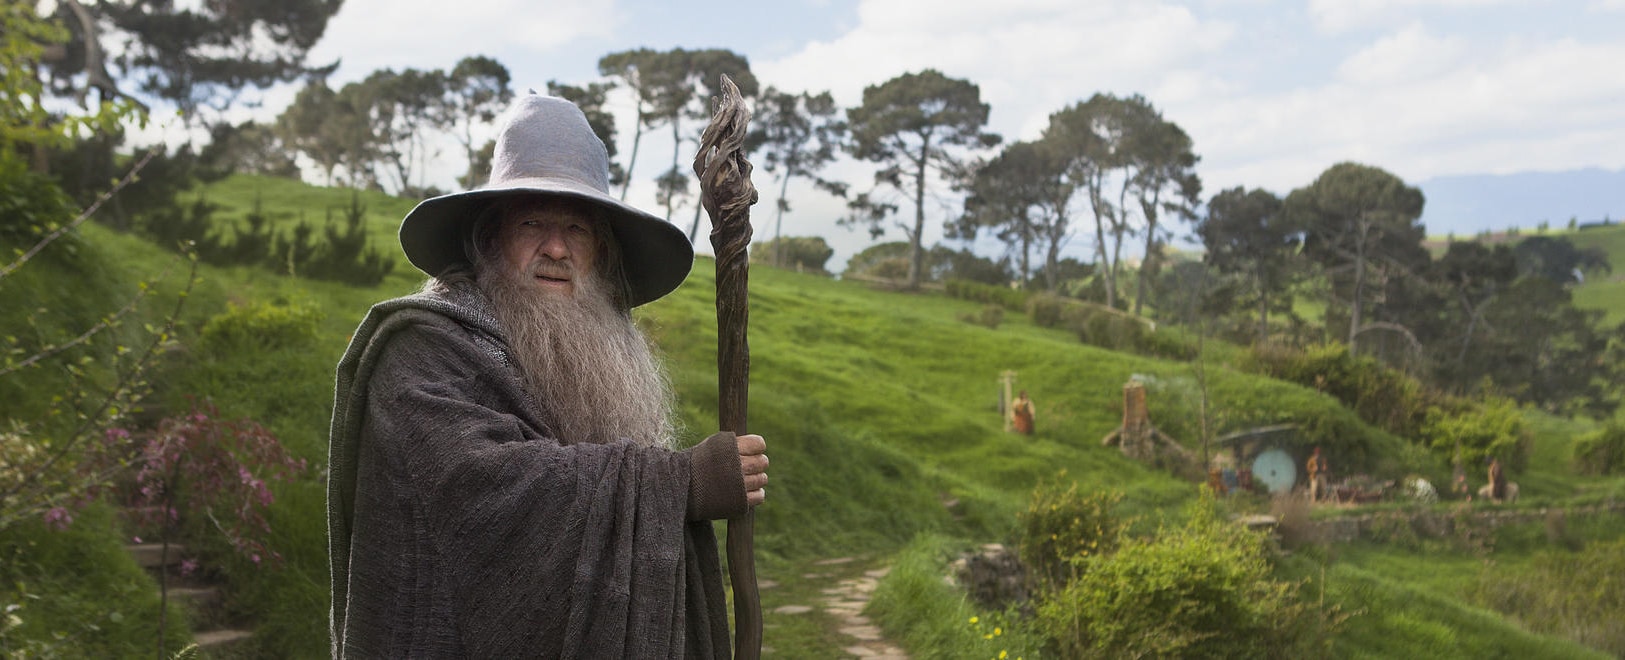 Lord of the Rings Filming Locations in New Zealand